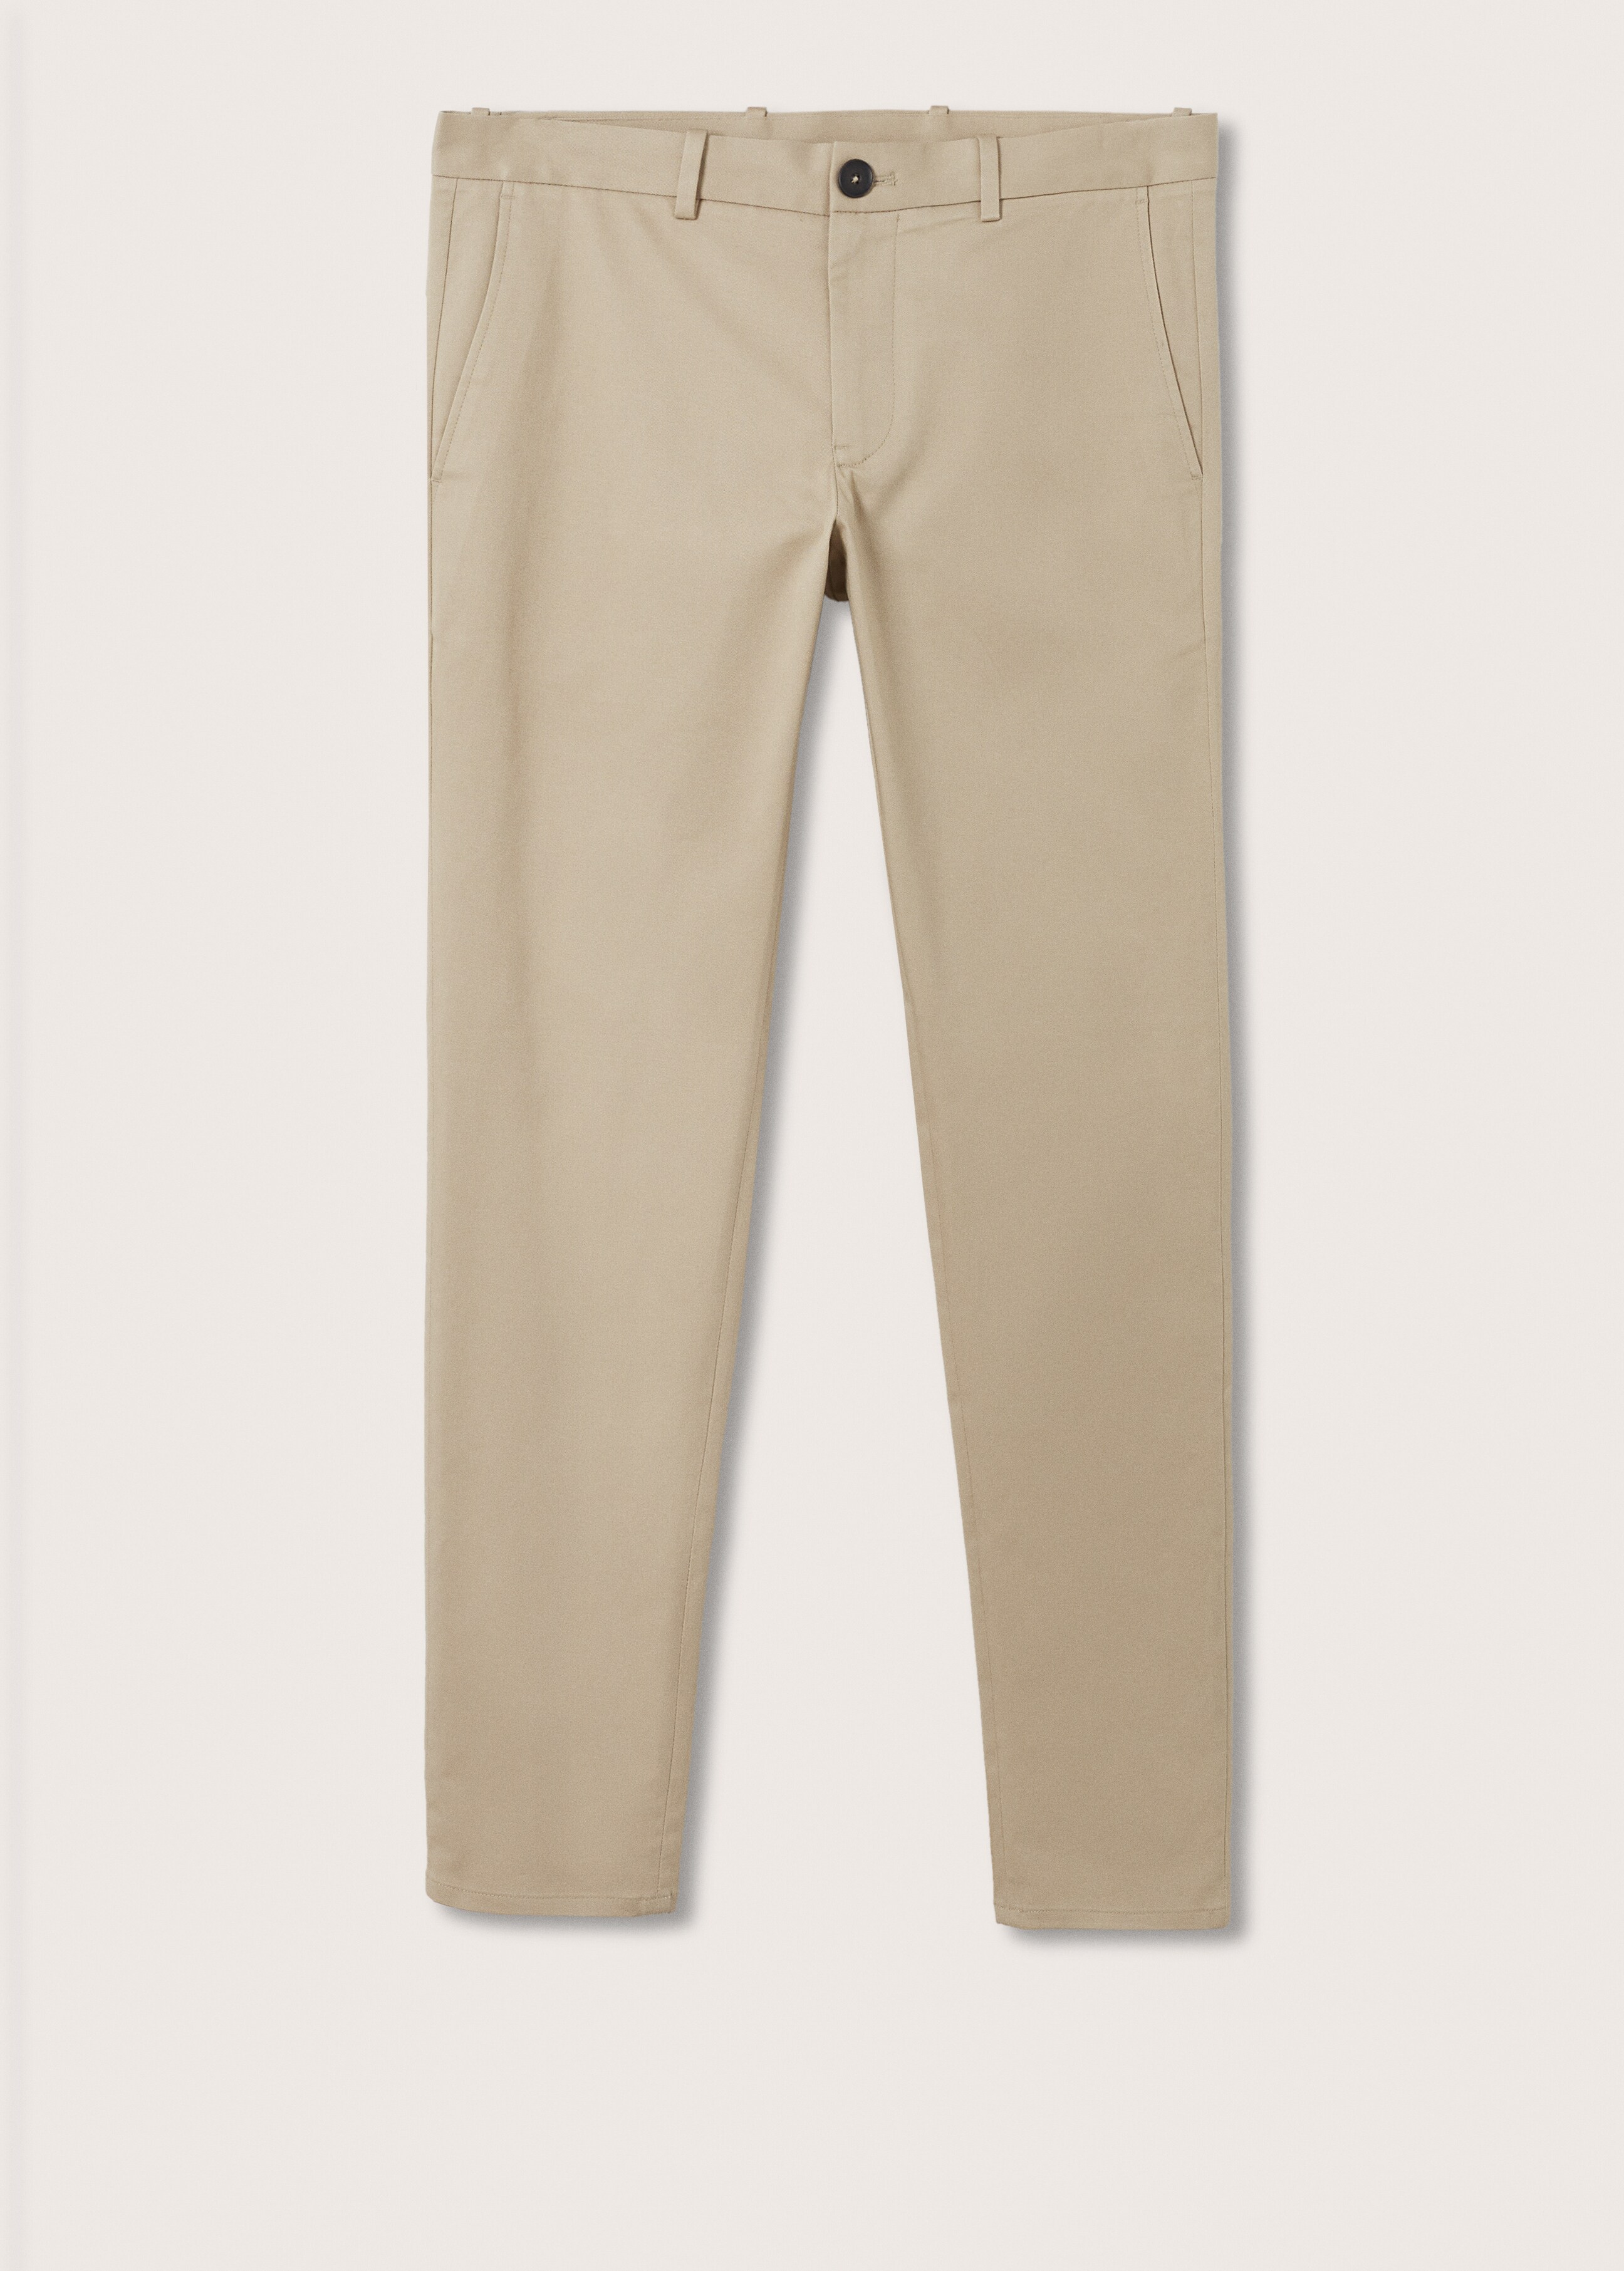 Skinny chino trousers - Article without model